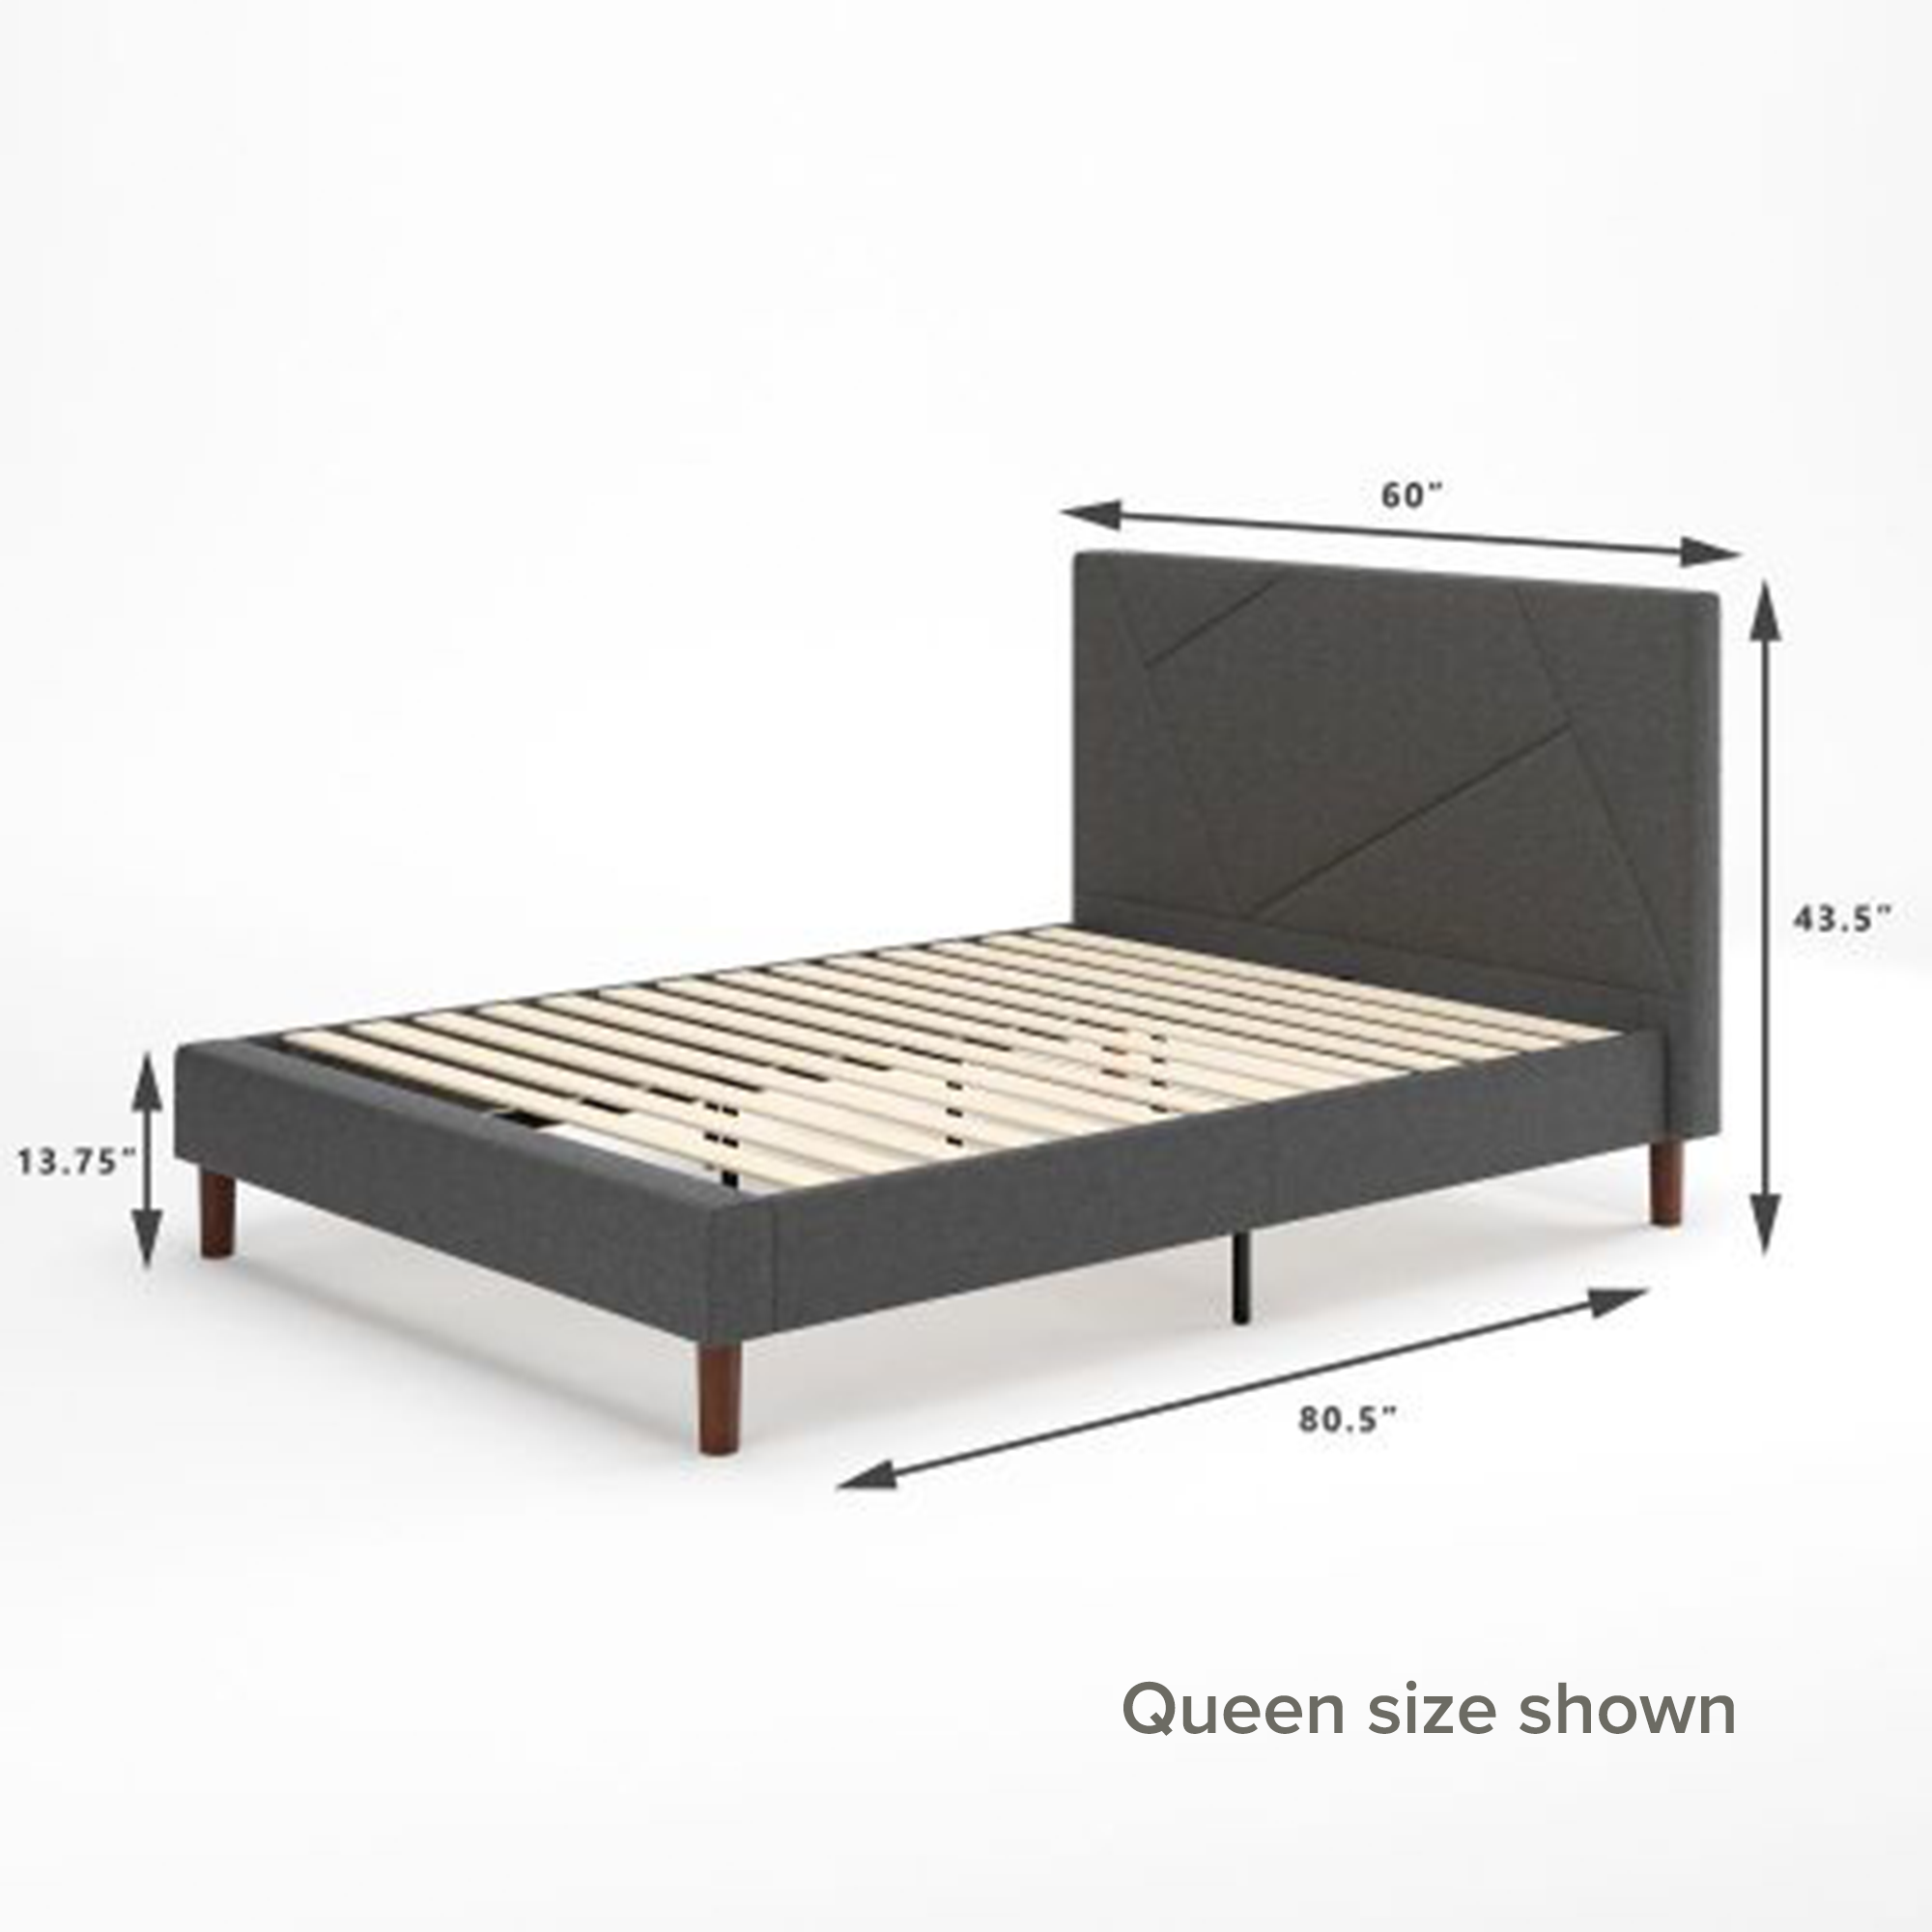 Judy upholstered Platform Bed Dimension queen size shown